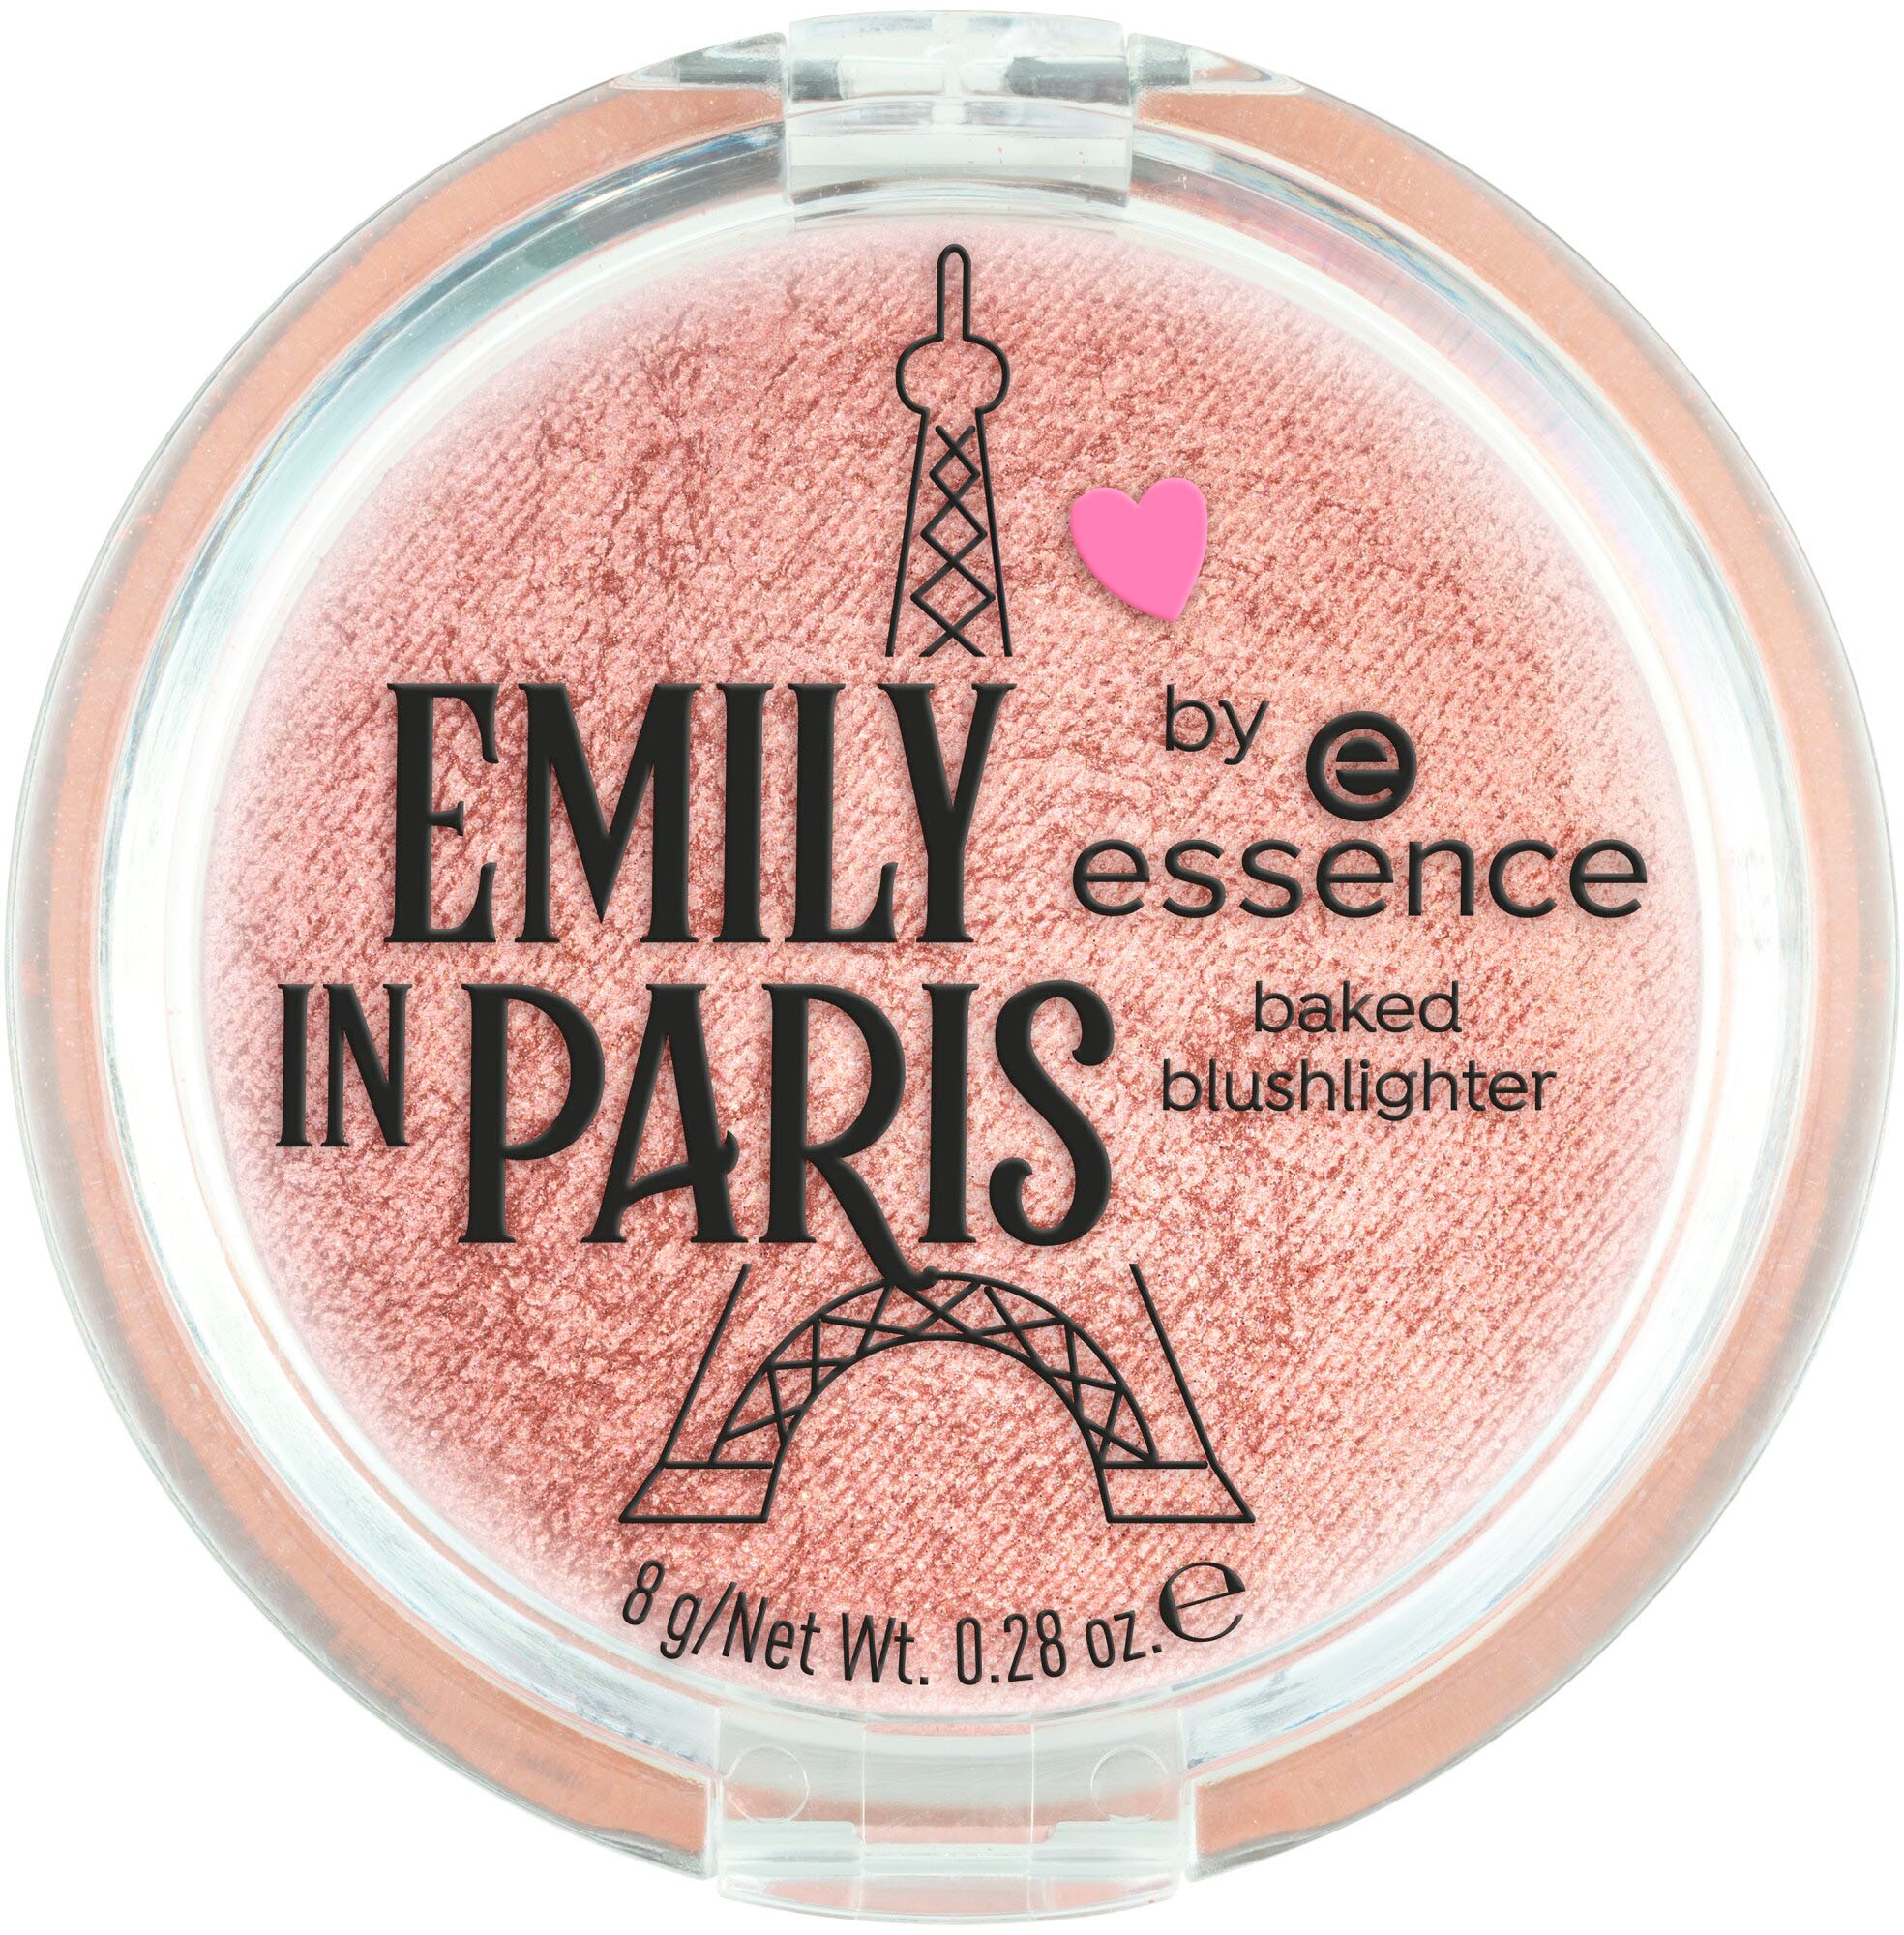 Rouge online PARIS IN bei Essence blushlighter« »EMILY baked by essence